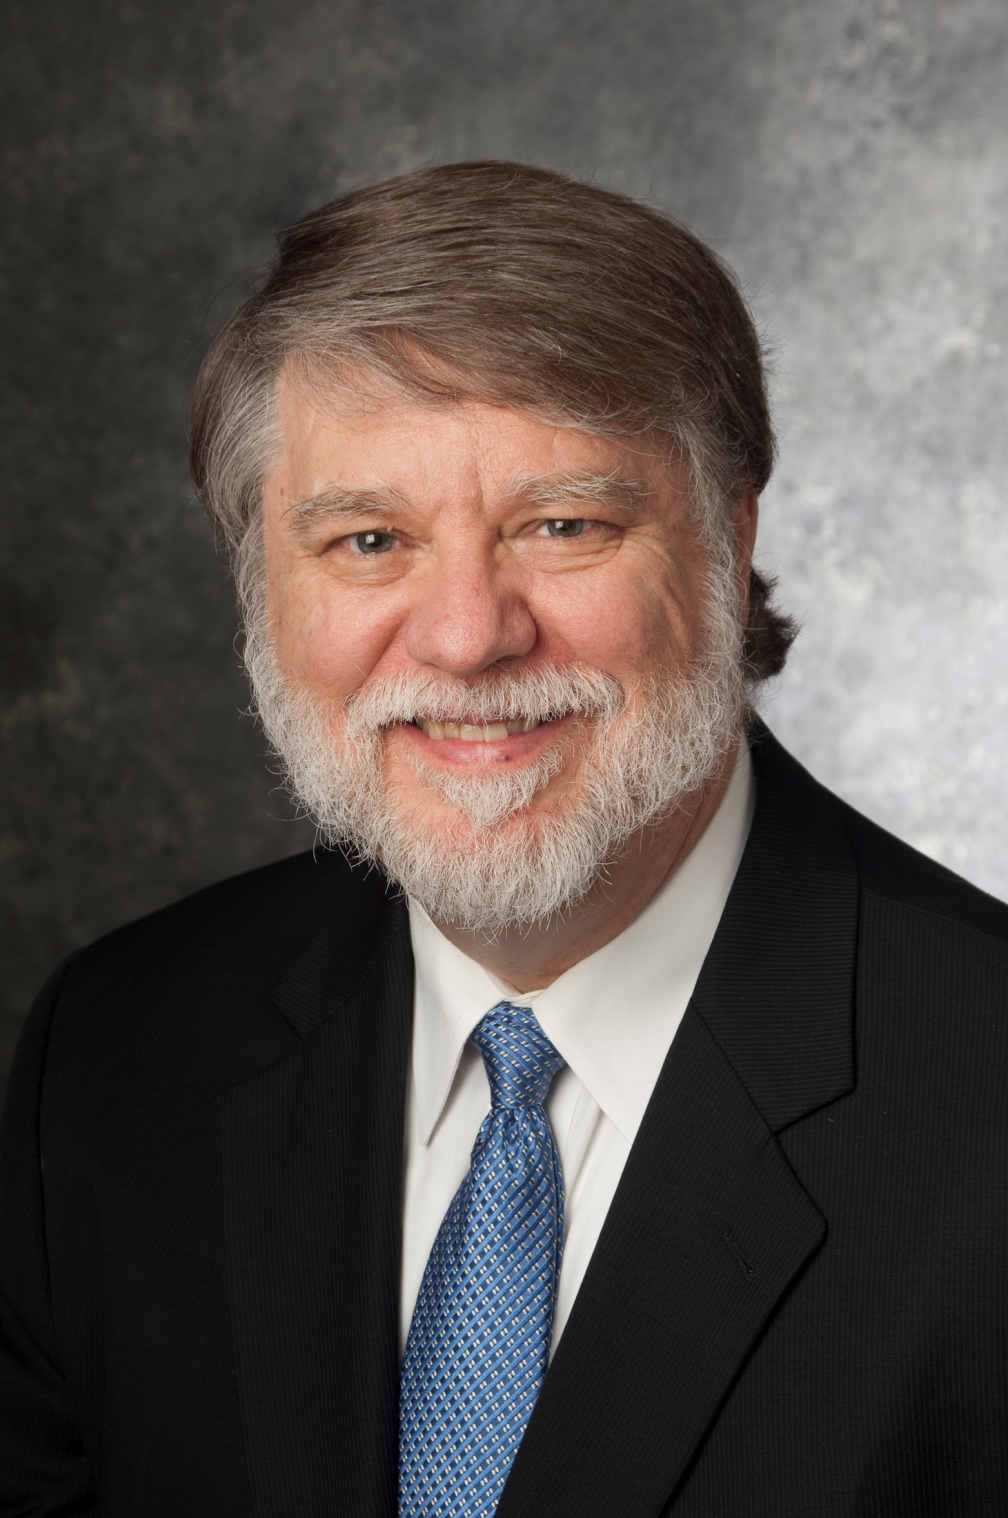 A headshot of James Dunham, emeritus member of the Lyle School of Engineering Faculty.